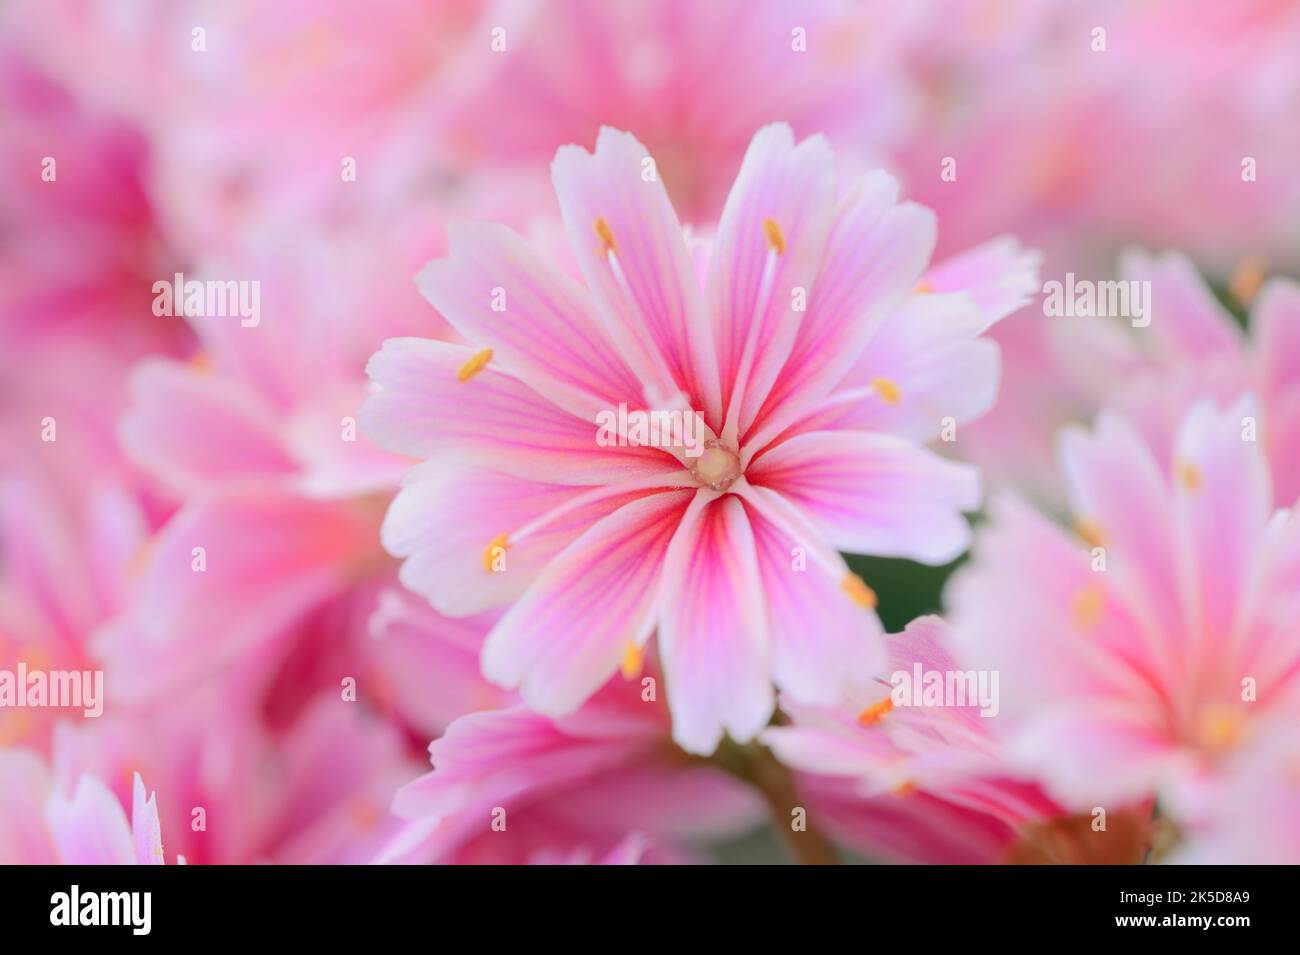 Porcelain floret or bitterroot (Lewisia cotyledon), ornamental plant, occurrence in North America. Stock Photo